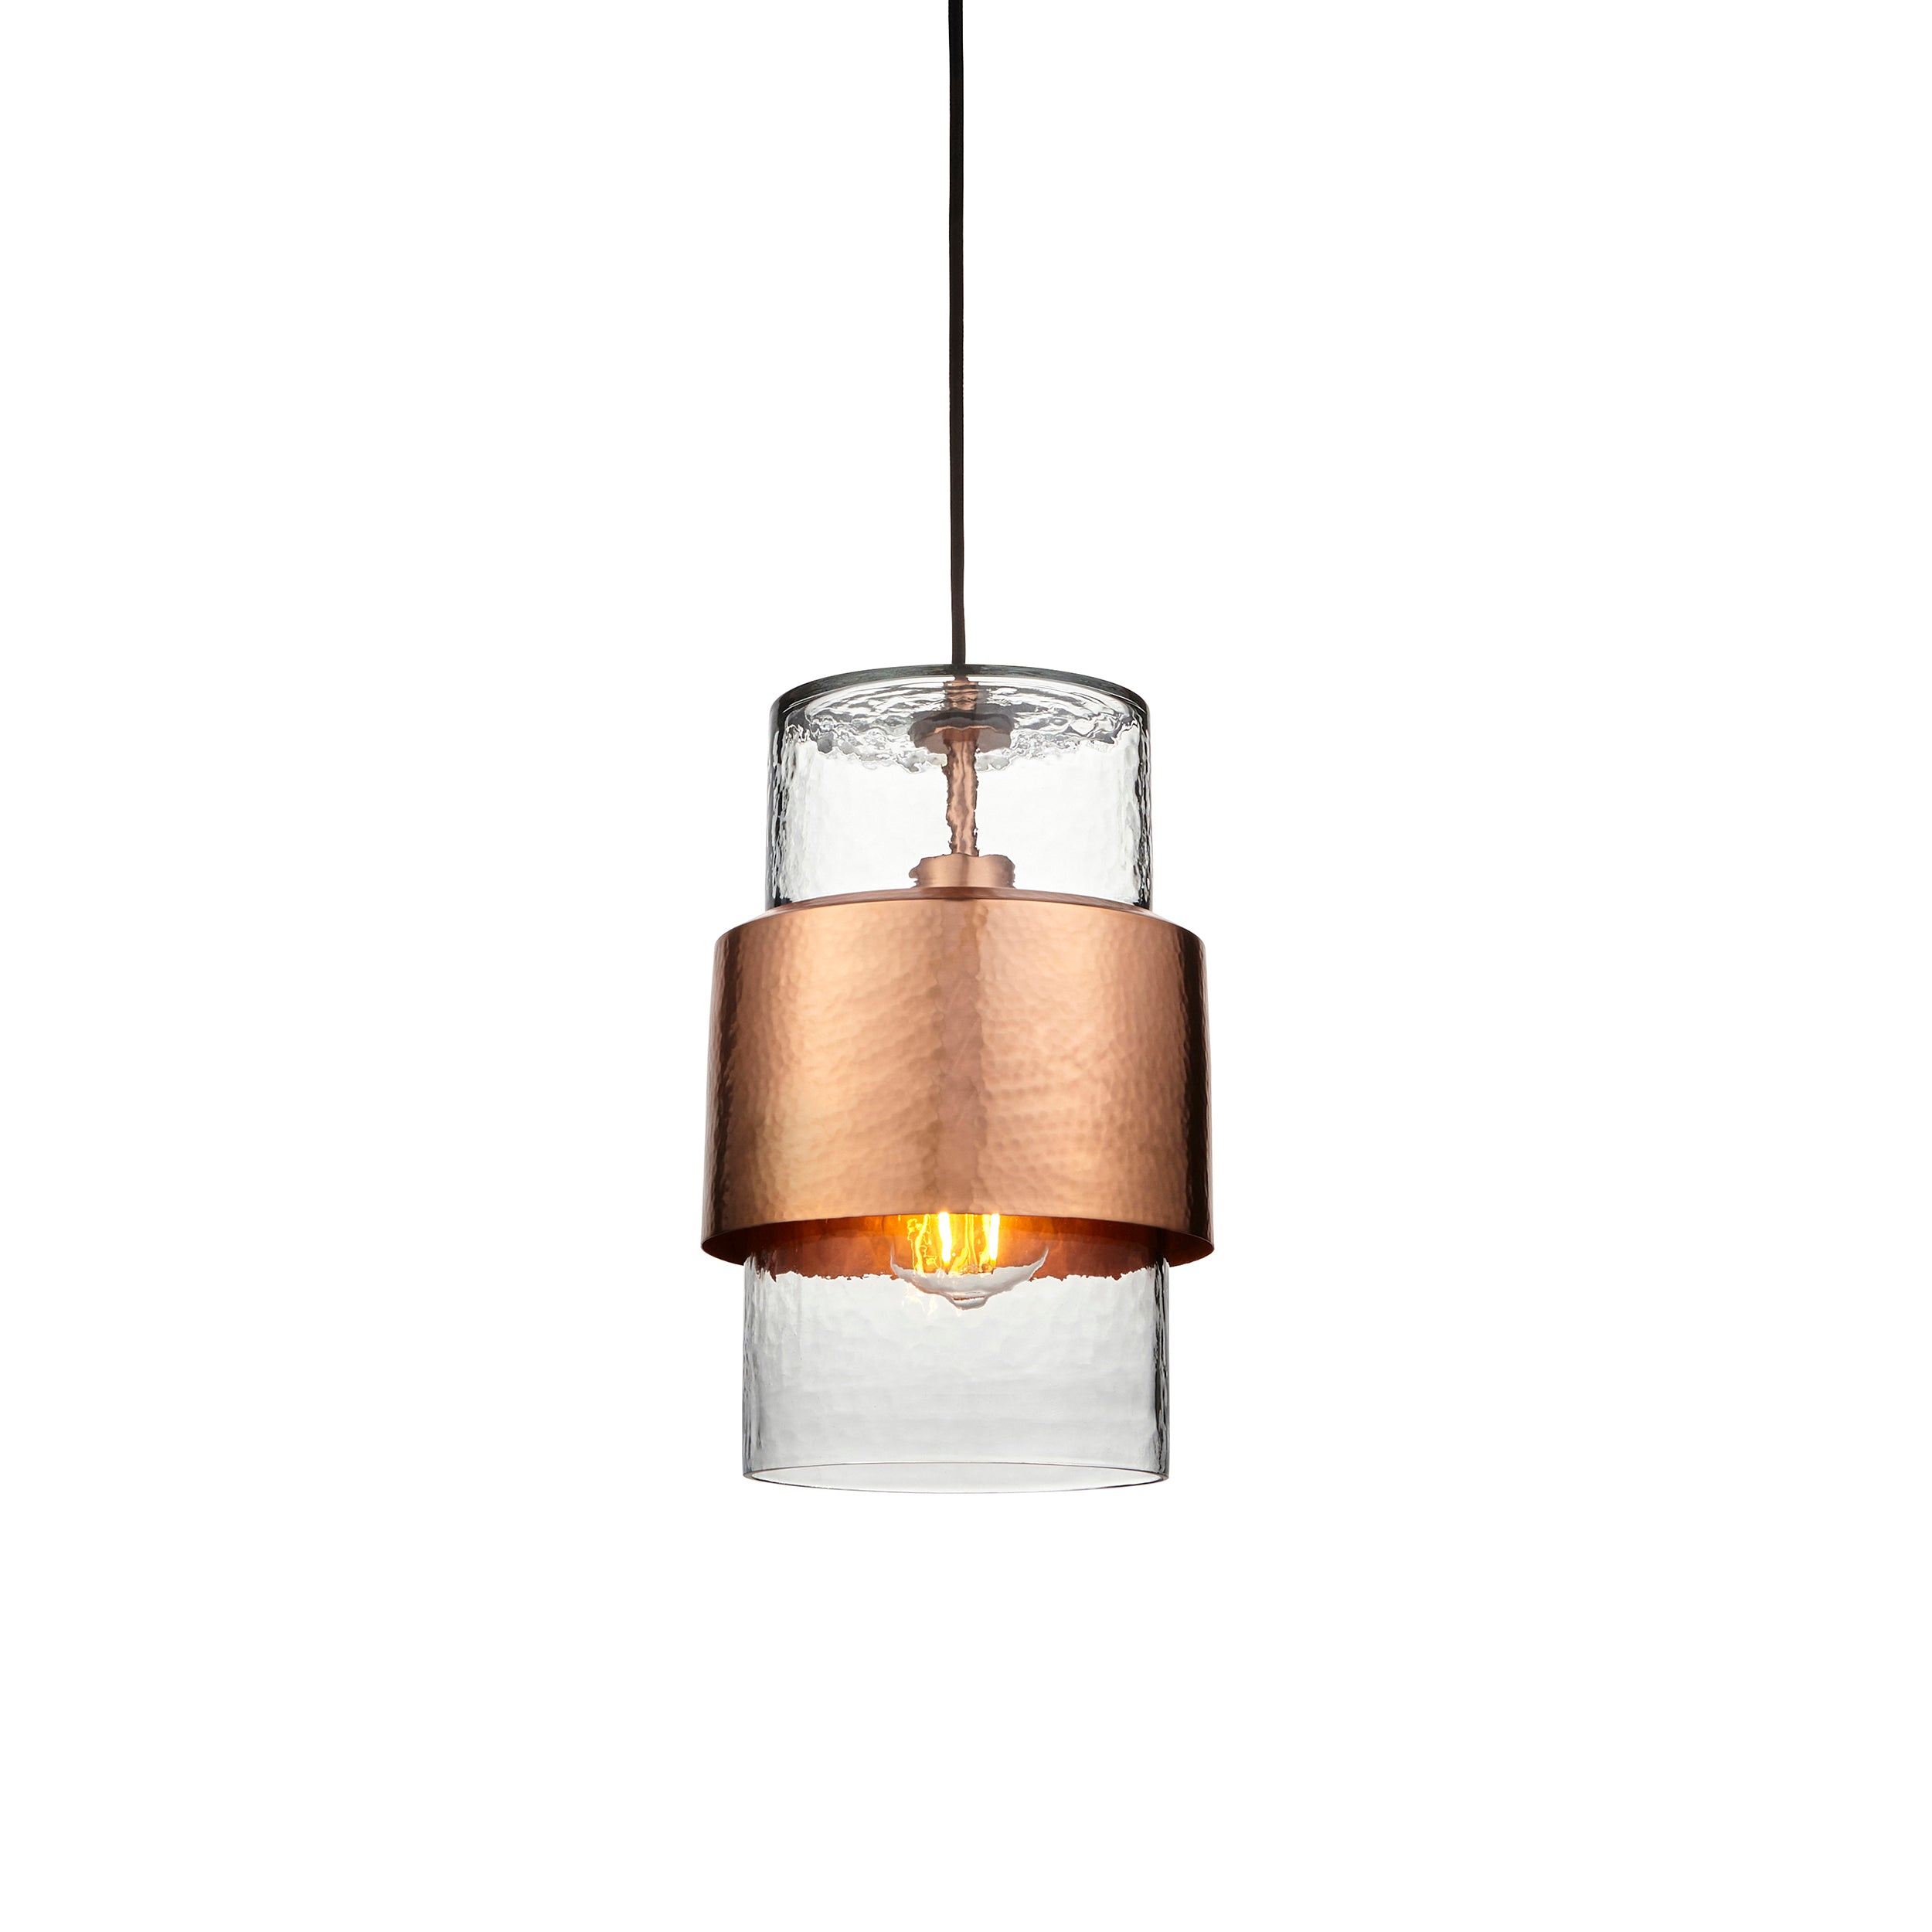 Lightologist Hammered copper plate & textured clear glass Single Pendant Light WIN13106720